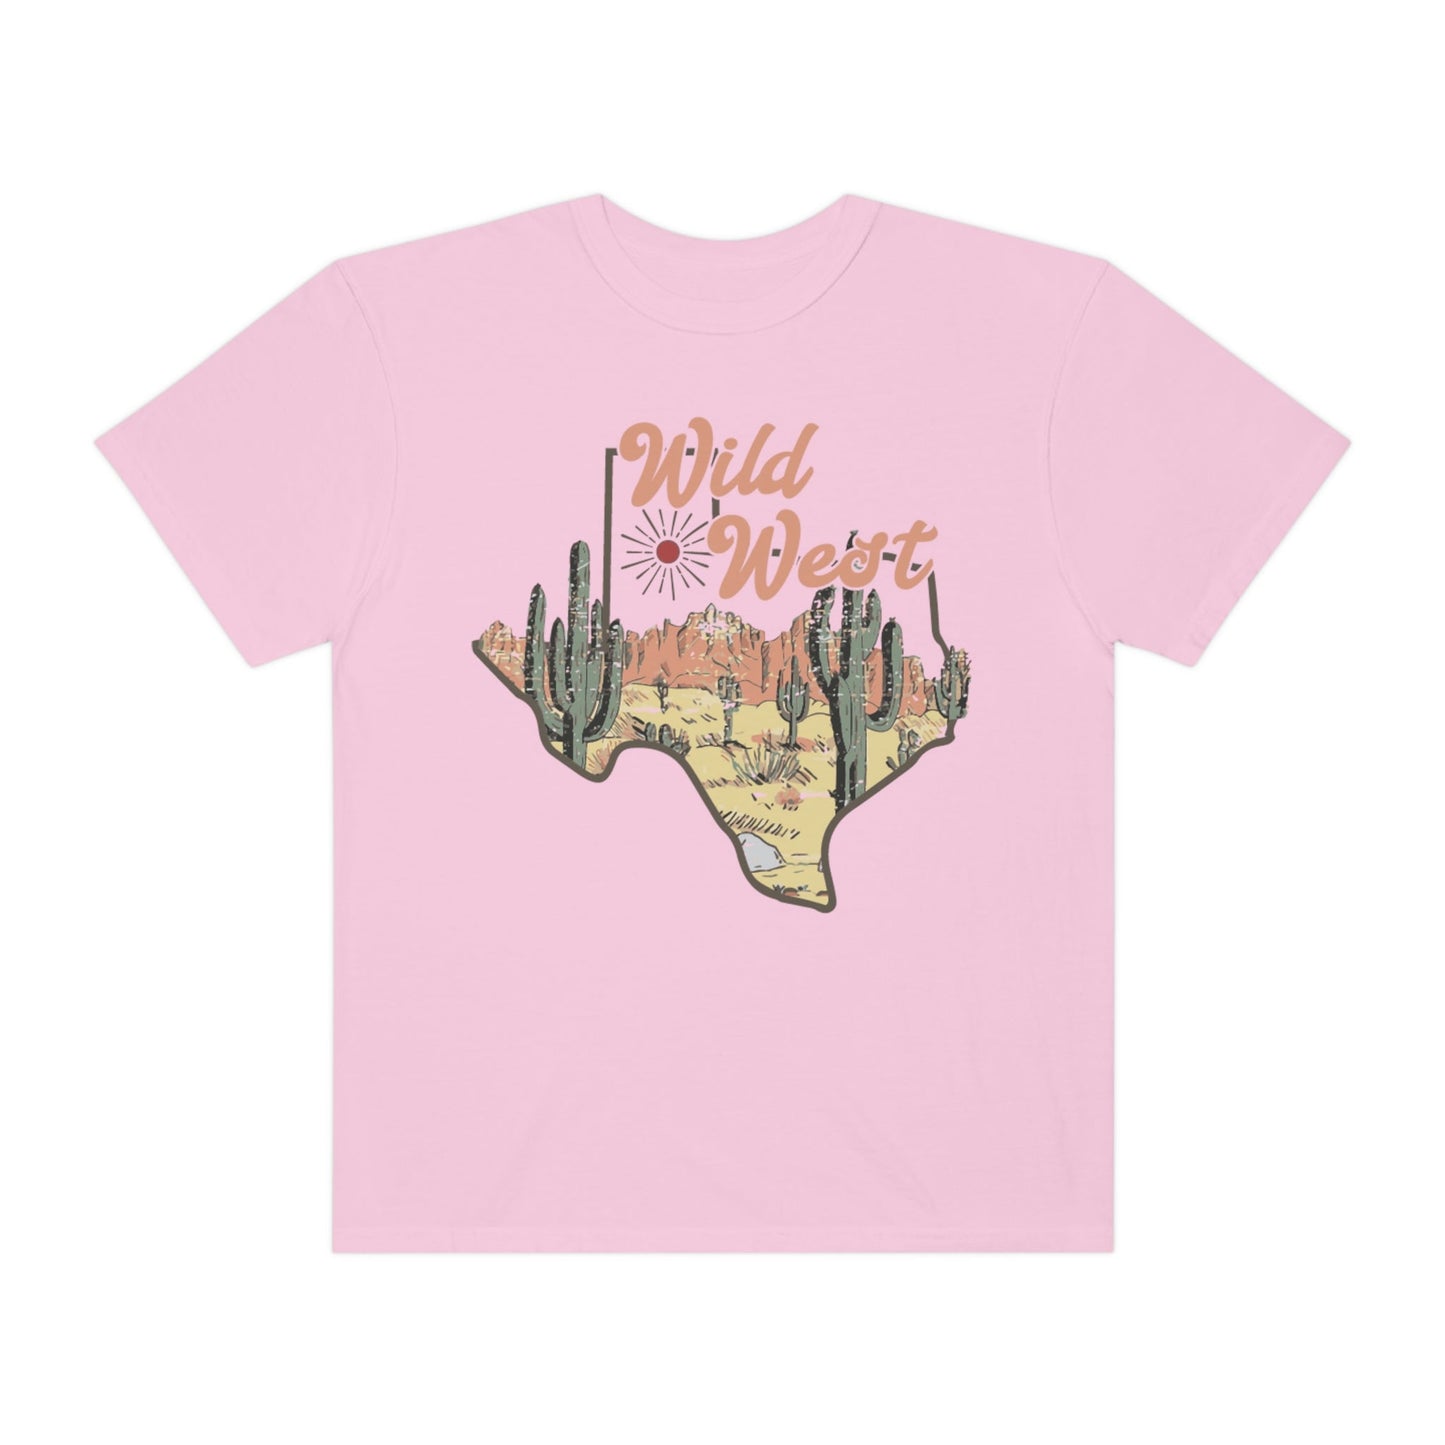 Wild West Texas Shirt, Comfort Colors Funny Western Graphic Tee